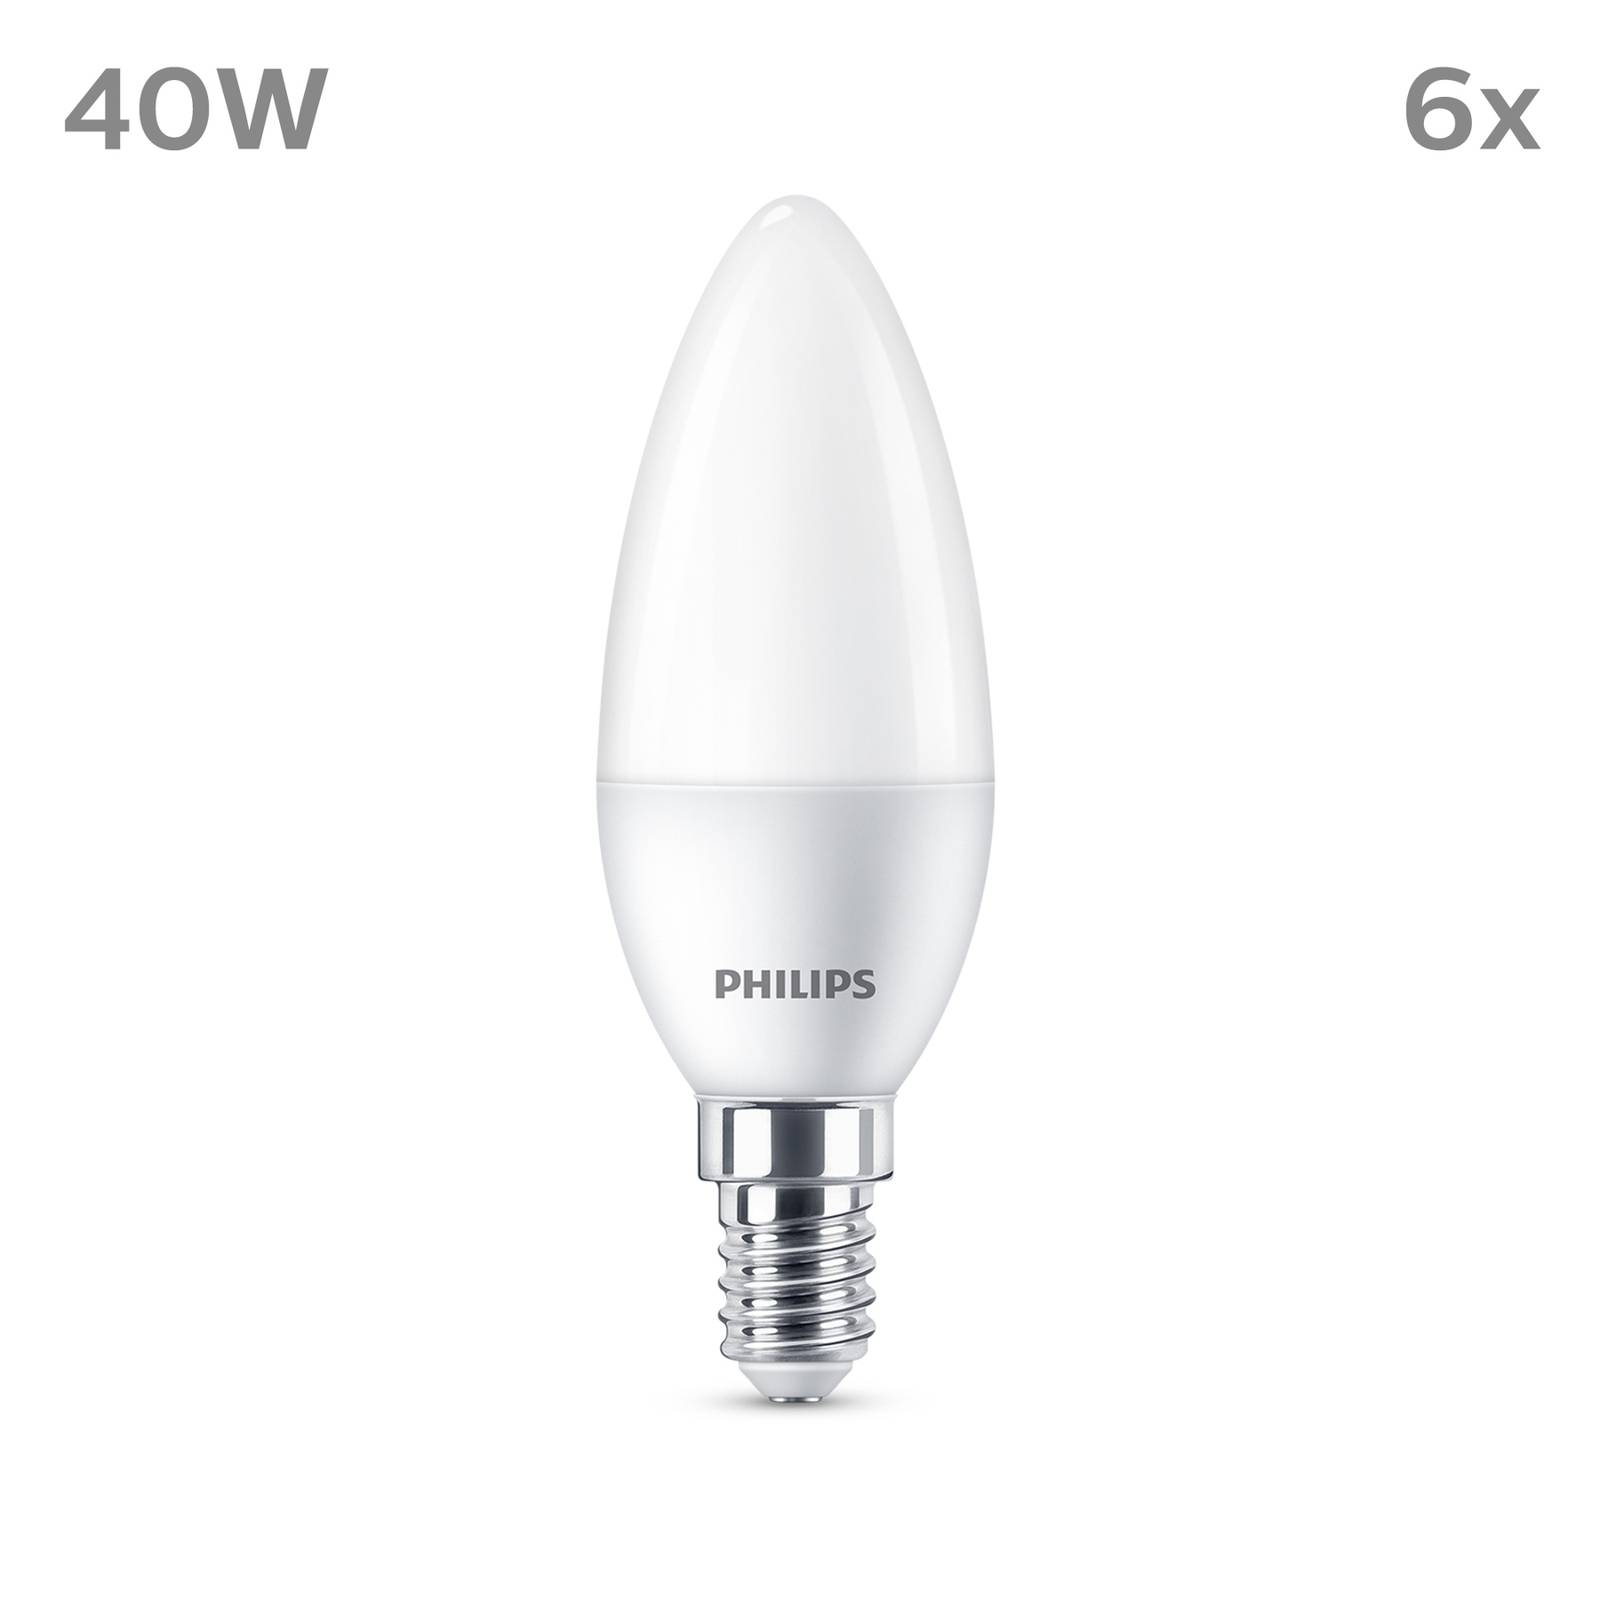 Philips bougie LED E14 4,9W 470 lm 2 700K mate x6